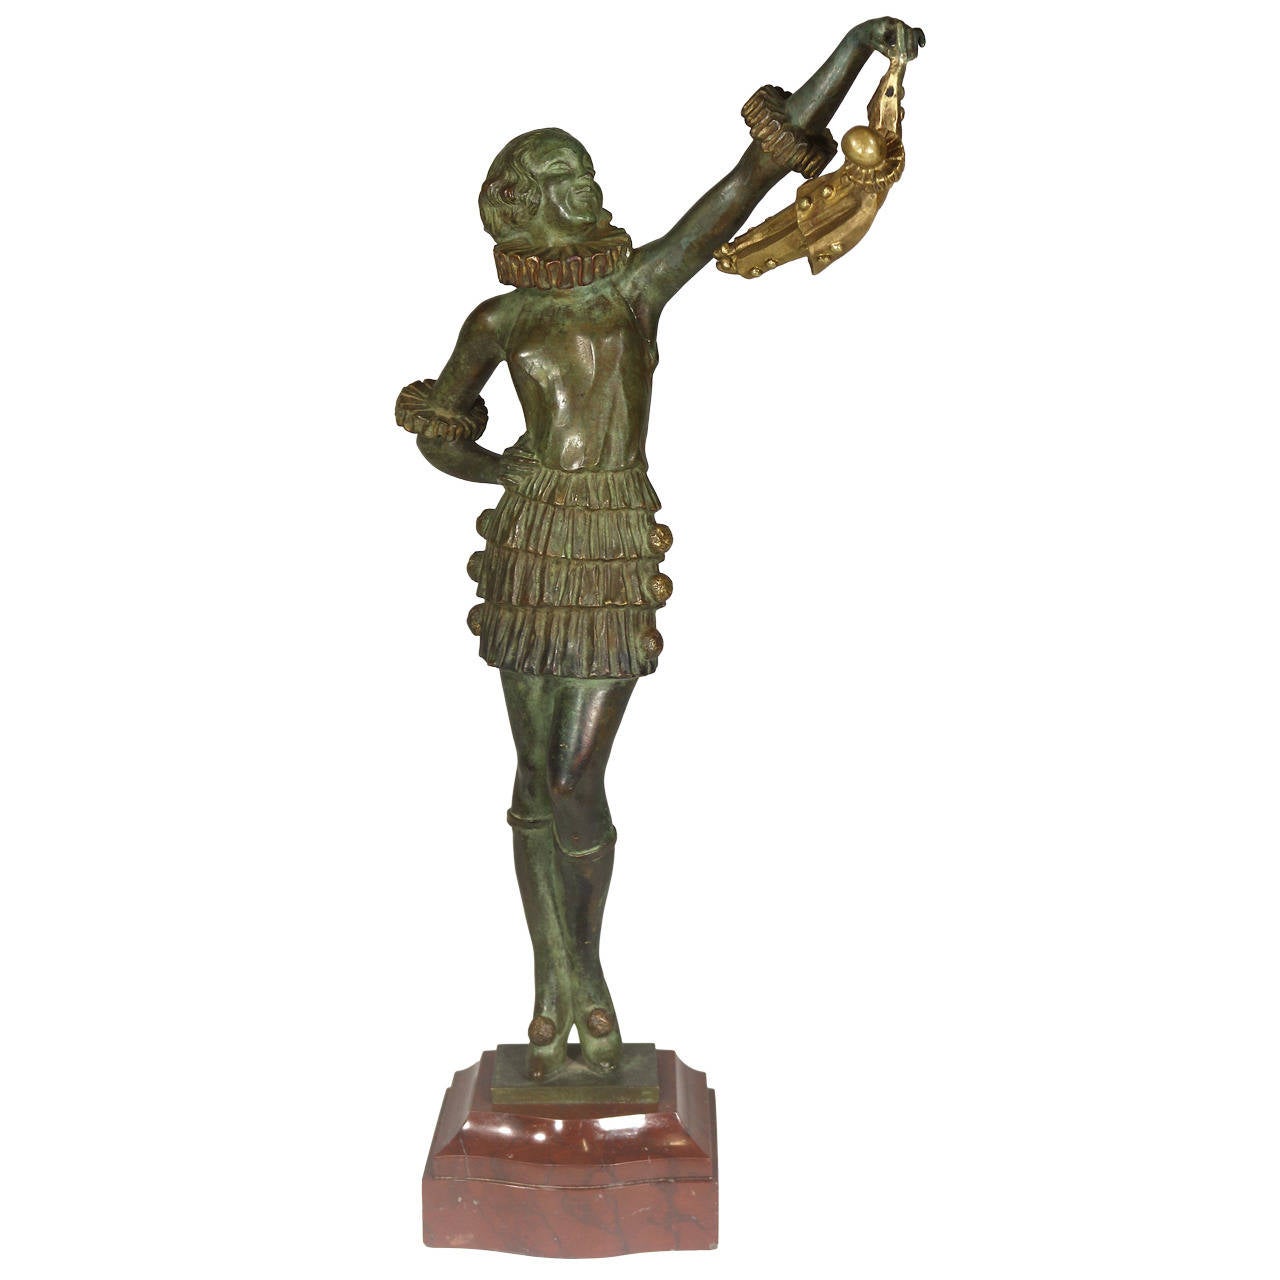 A wonderful, Art Deco quite striking bronze statue by noted sculptor Pierre Laurel from the famed Marcel Guillemard foundry. It depicts the female harlequin, Pierette in strong Art Deco style dangling a similarly attired male harlequin, Pierrot. Her